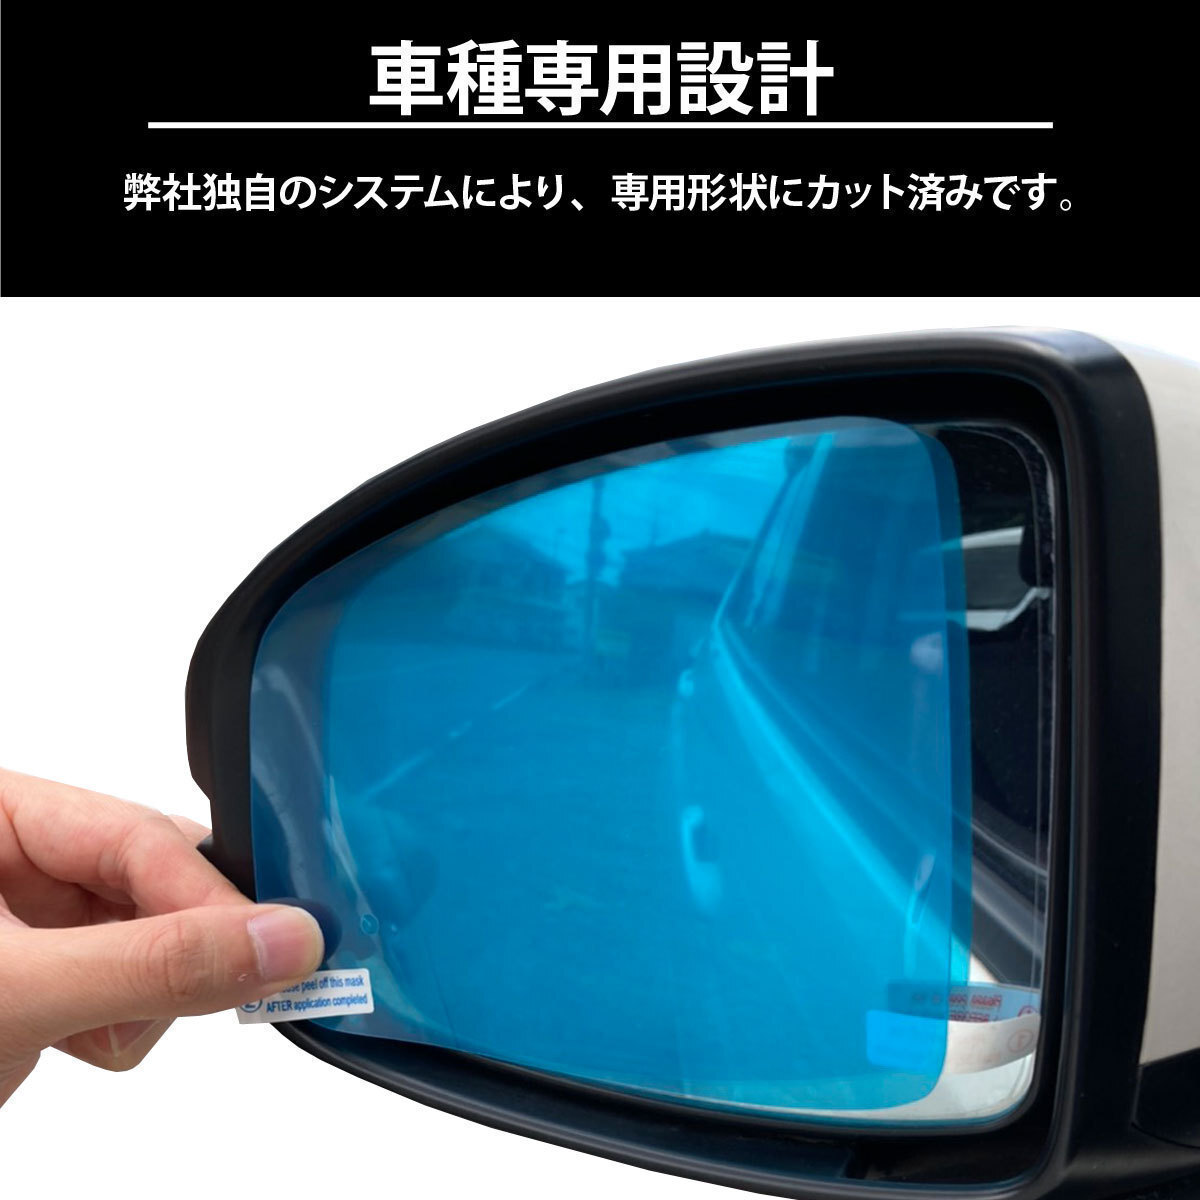  postage 185 jpy car make exclusive use VW Tourane 04/04~10/12 exclusive use water-repellent door mirror film left right set water-repellent effect 6 months shipping deadline 18 hour 